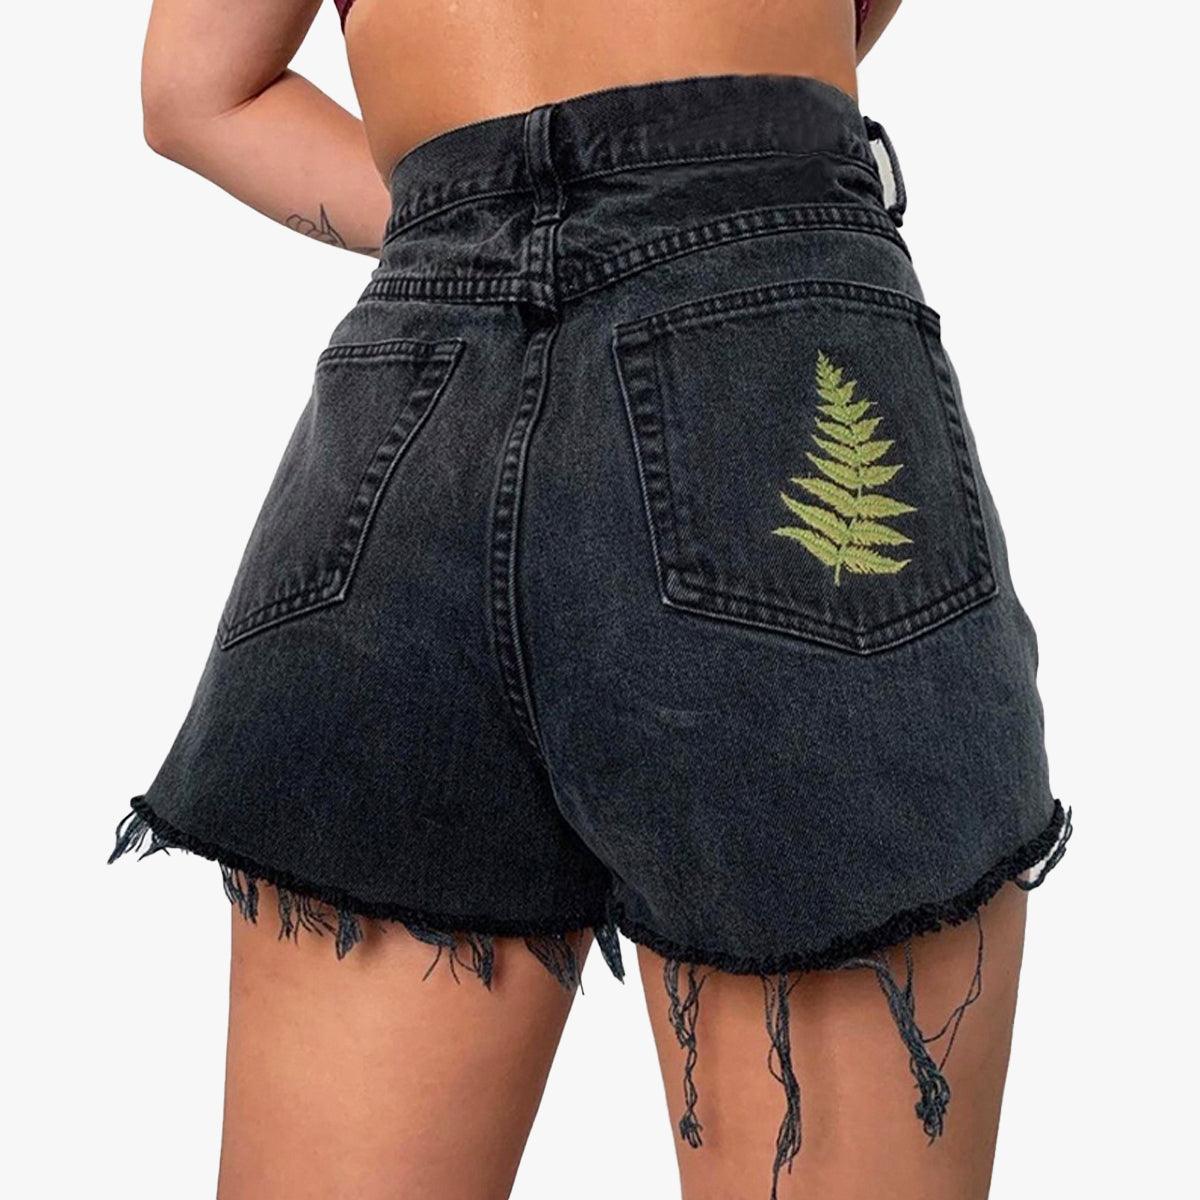 Fern Leaf Embroidery Black Shorts - Aesthetic Clothes Shop